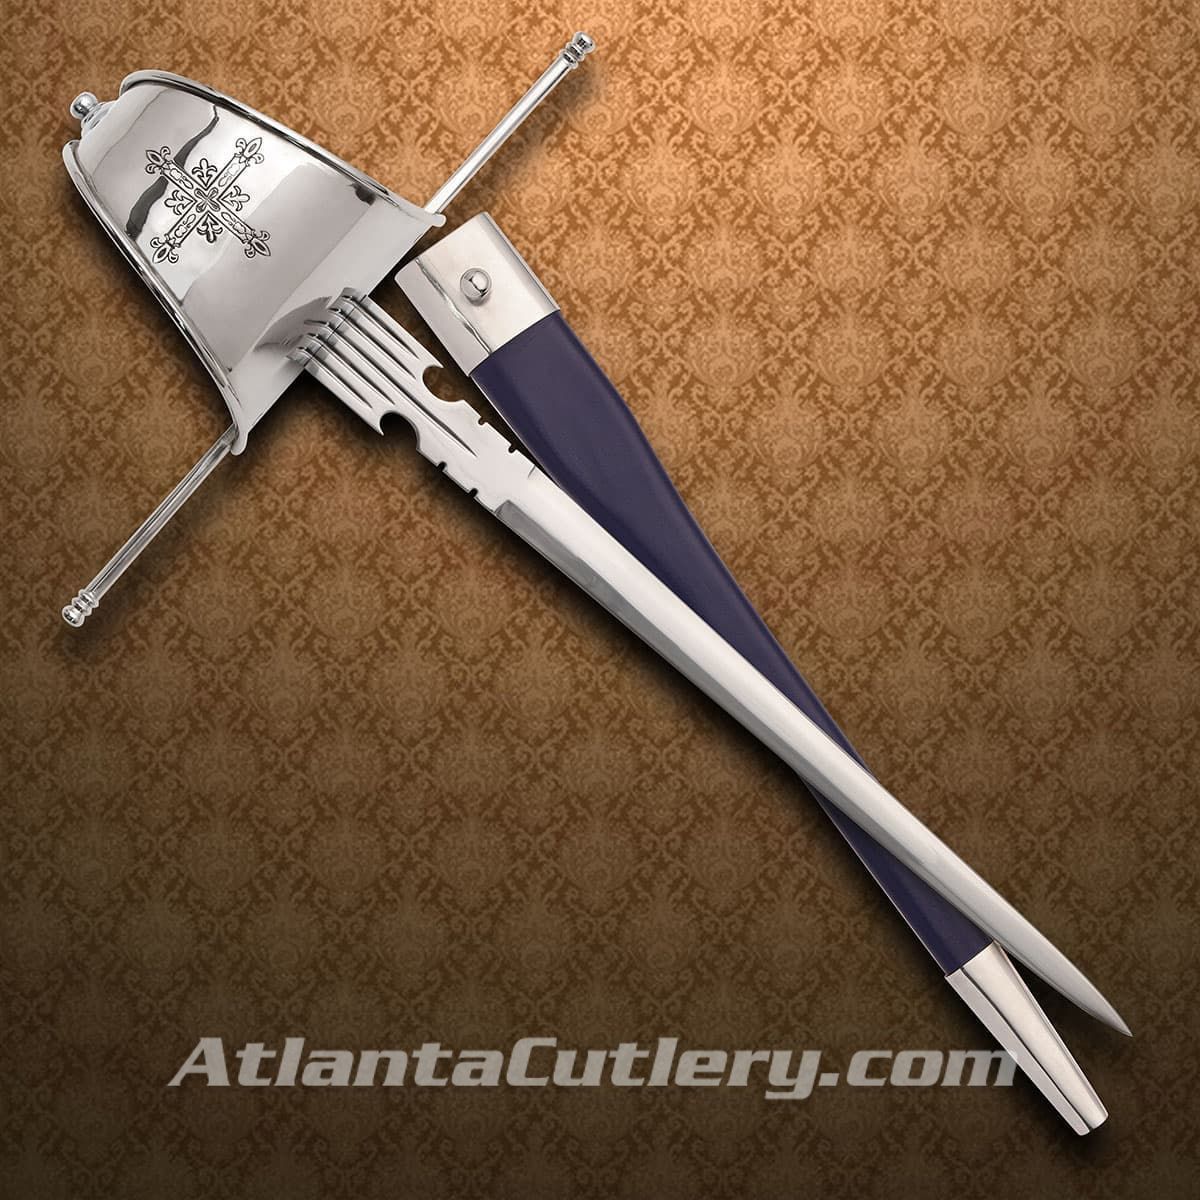 Windlass Main Gauche has high carbon steel blade with cut-outs and notches & a large guard. Includes leather scabbard